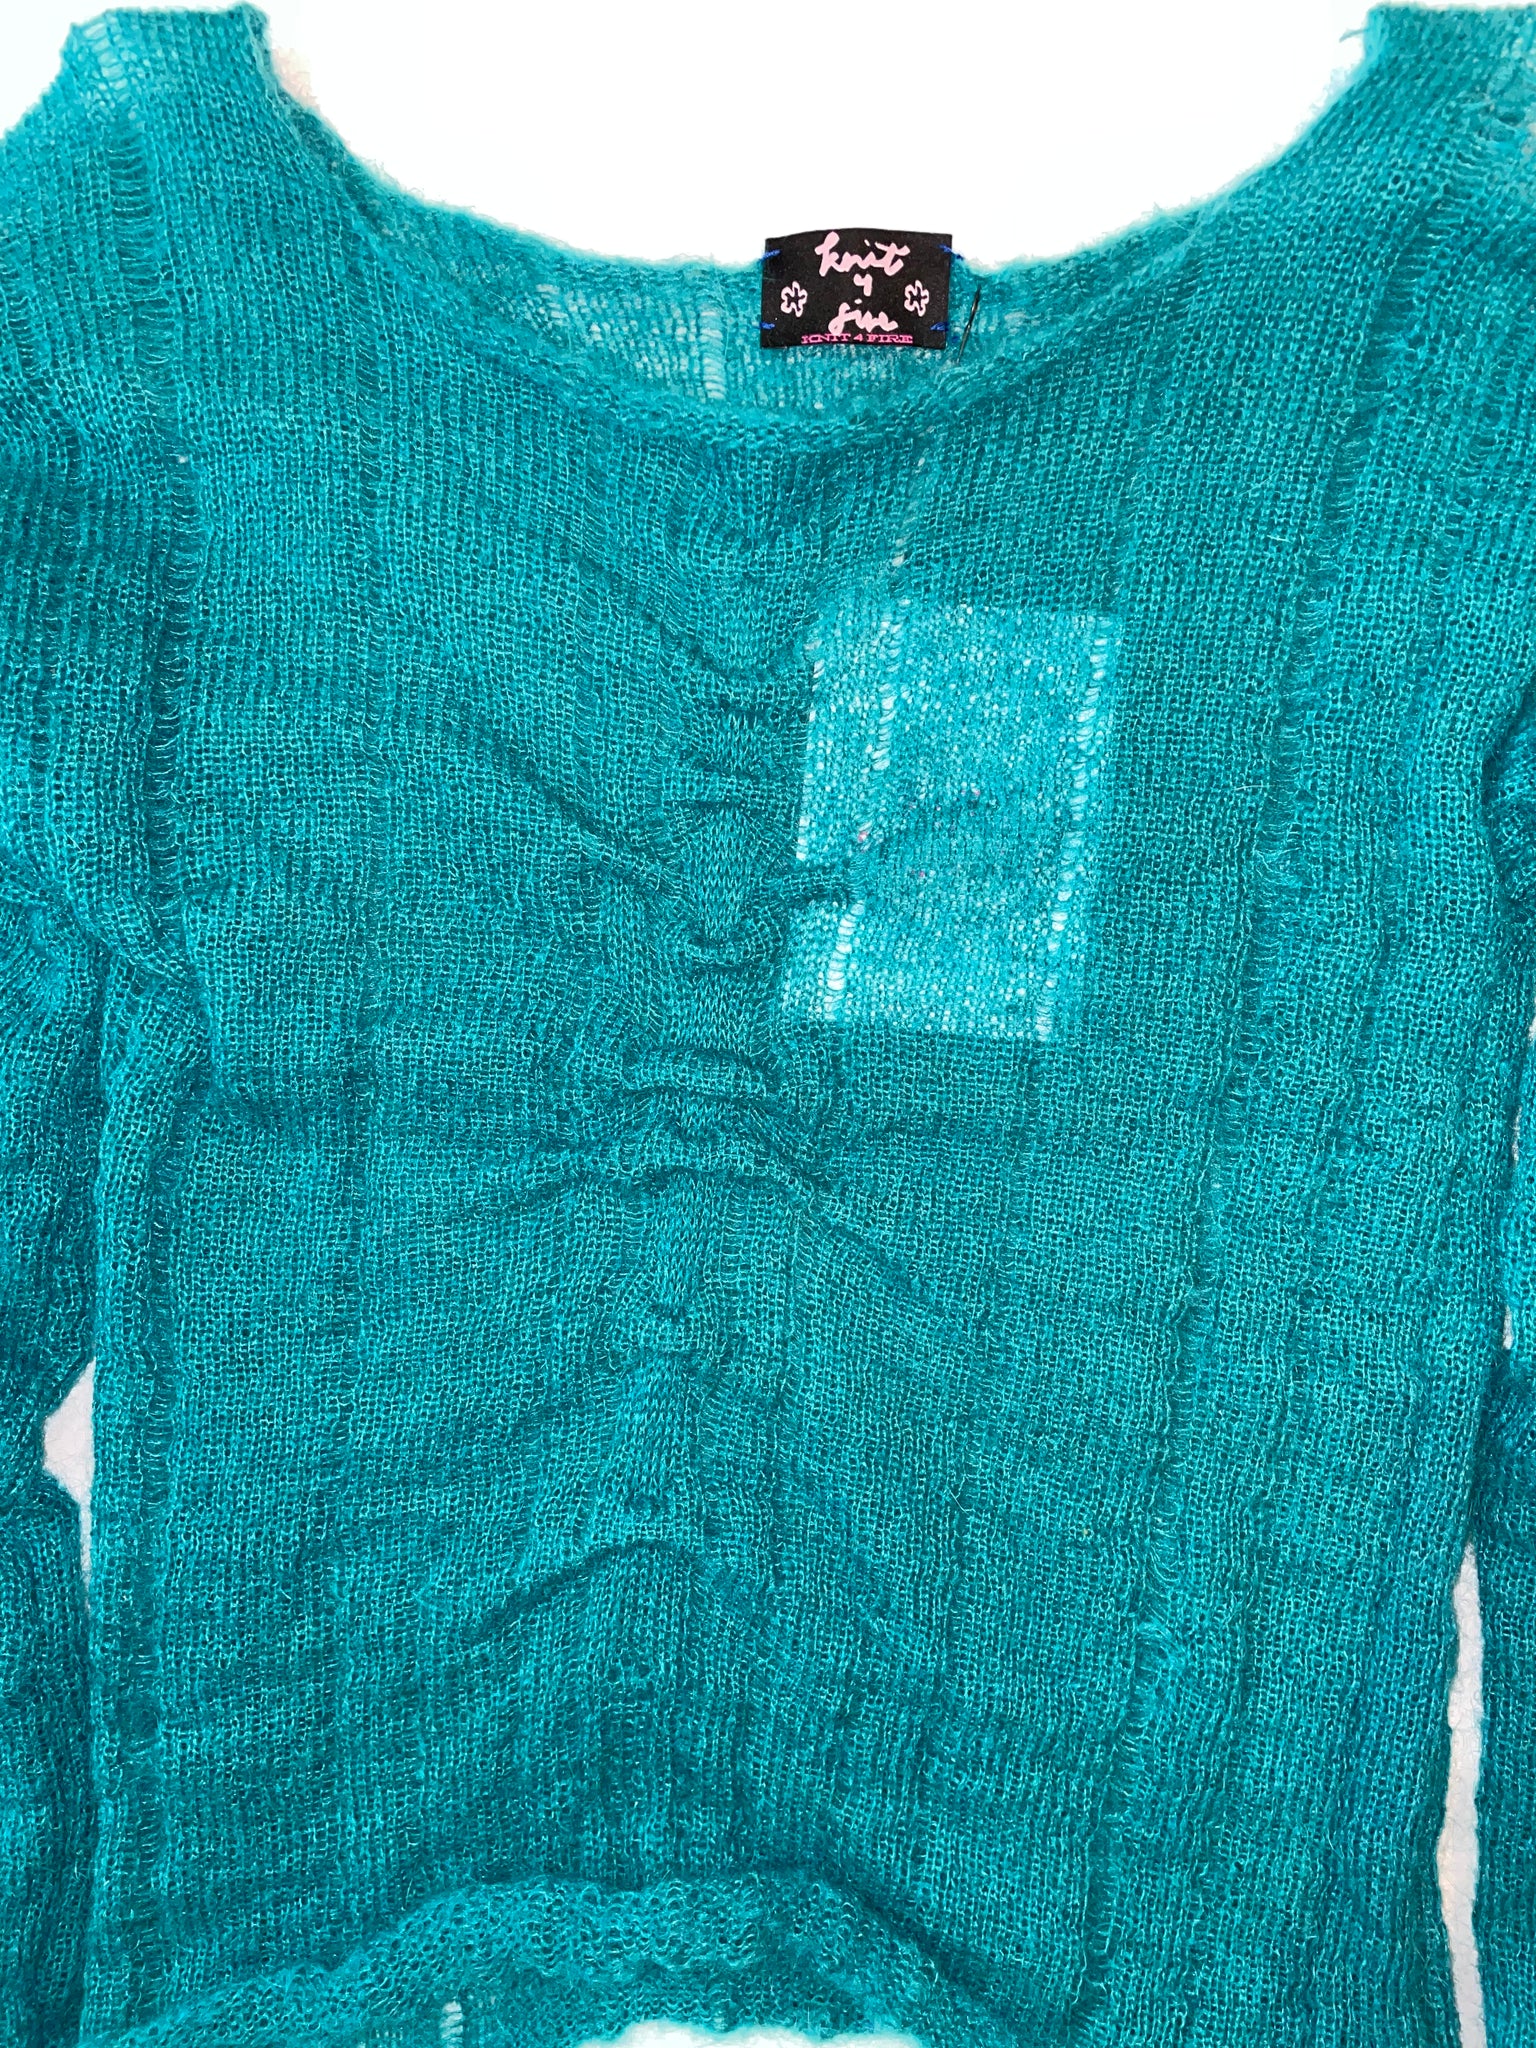 Turquoise mohair knit